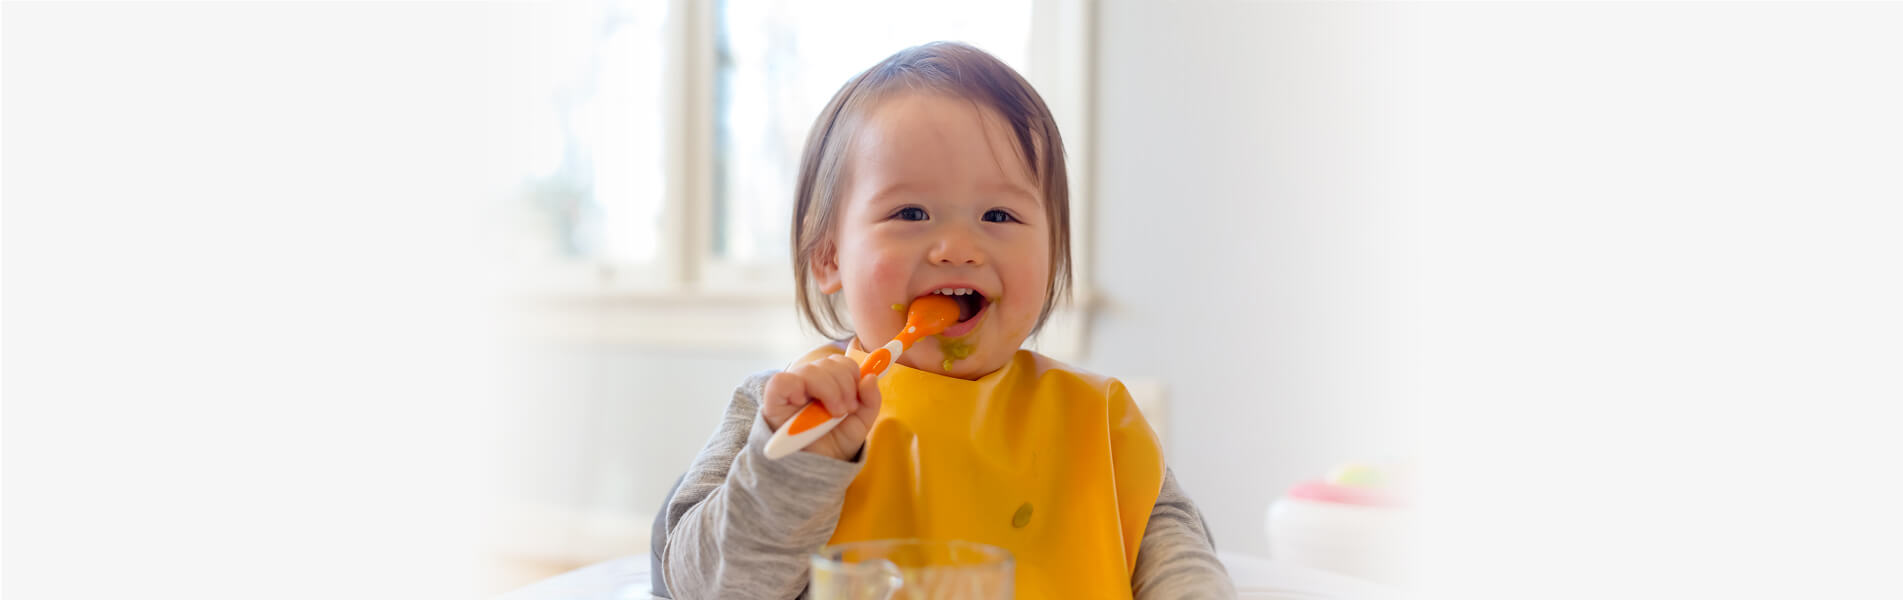 Happy toddler eating a meal